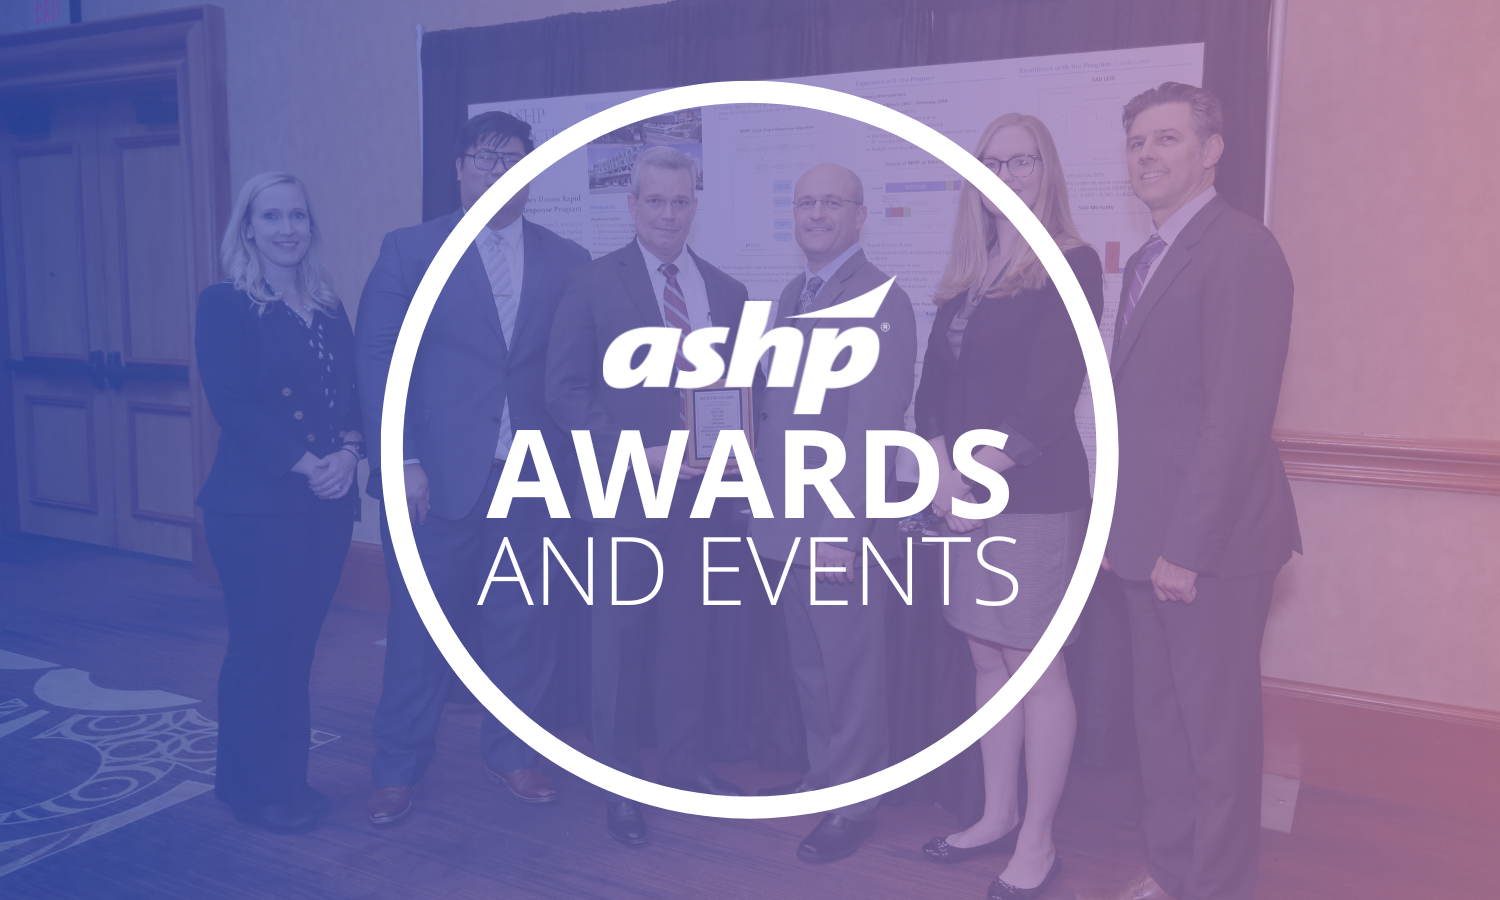 ashp awards and events